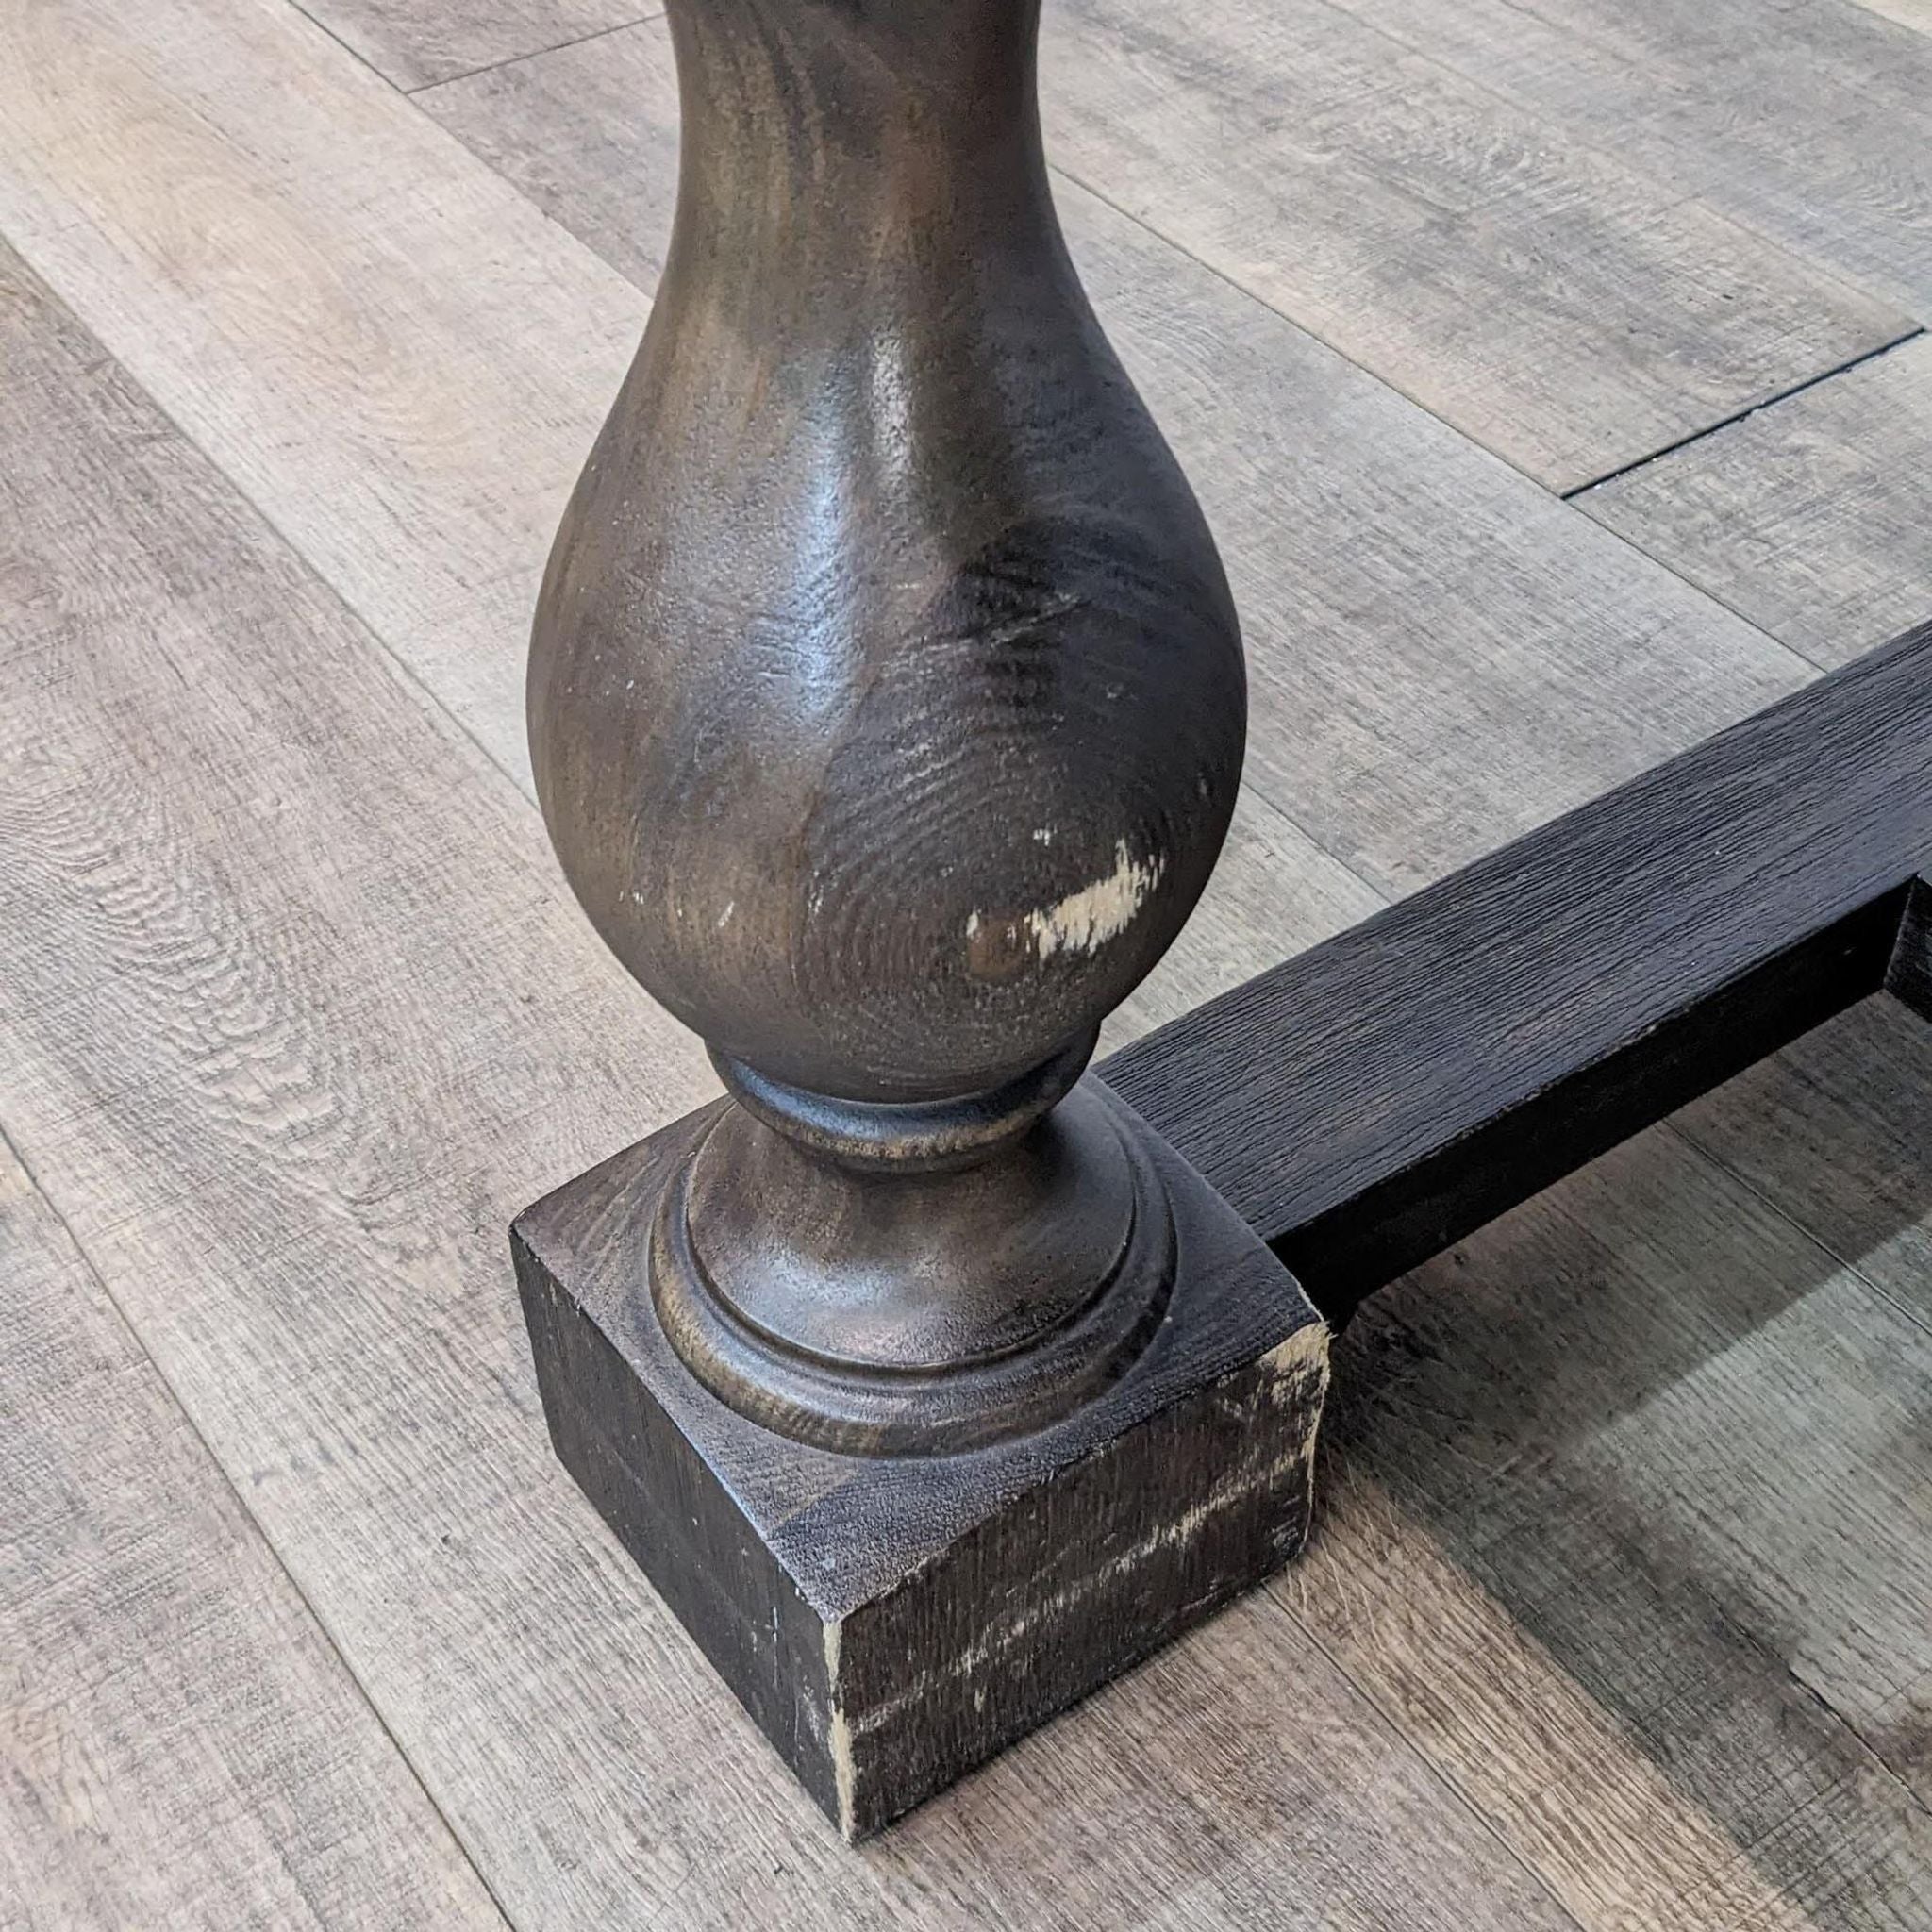 Close-up of Restoration Hardware dining table leg, showcasing lathe-turned baluster design and traditional joinery.